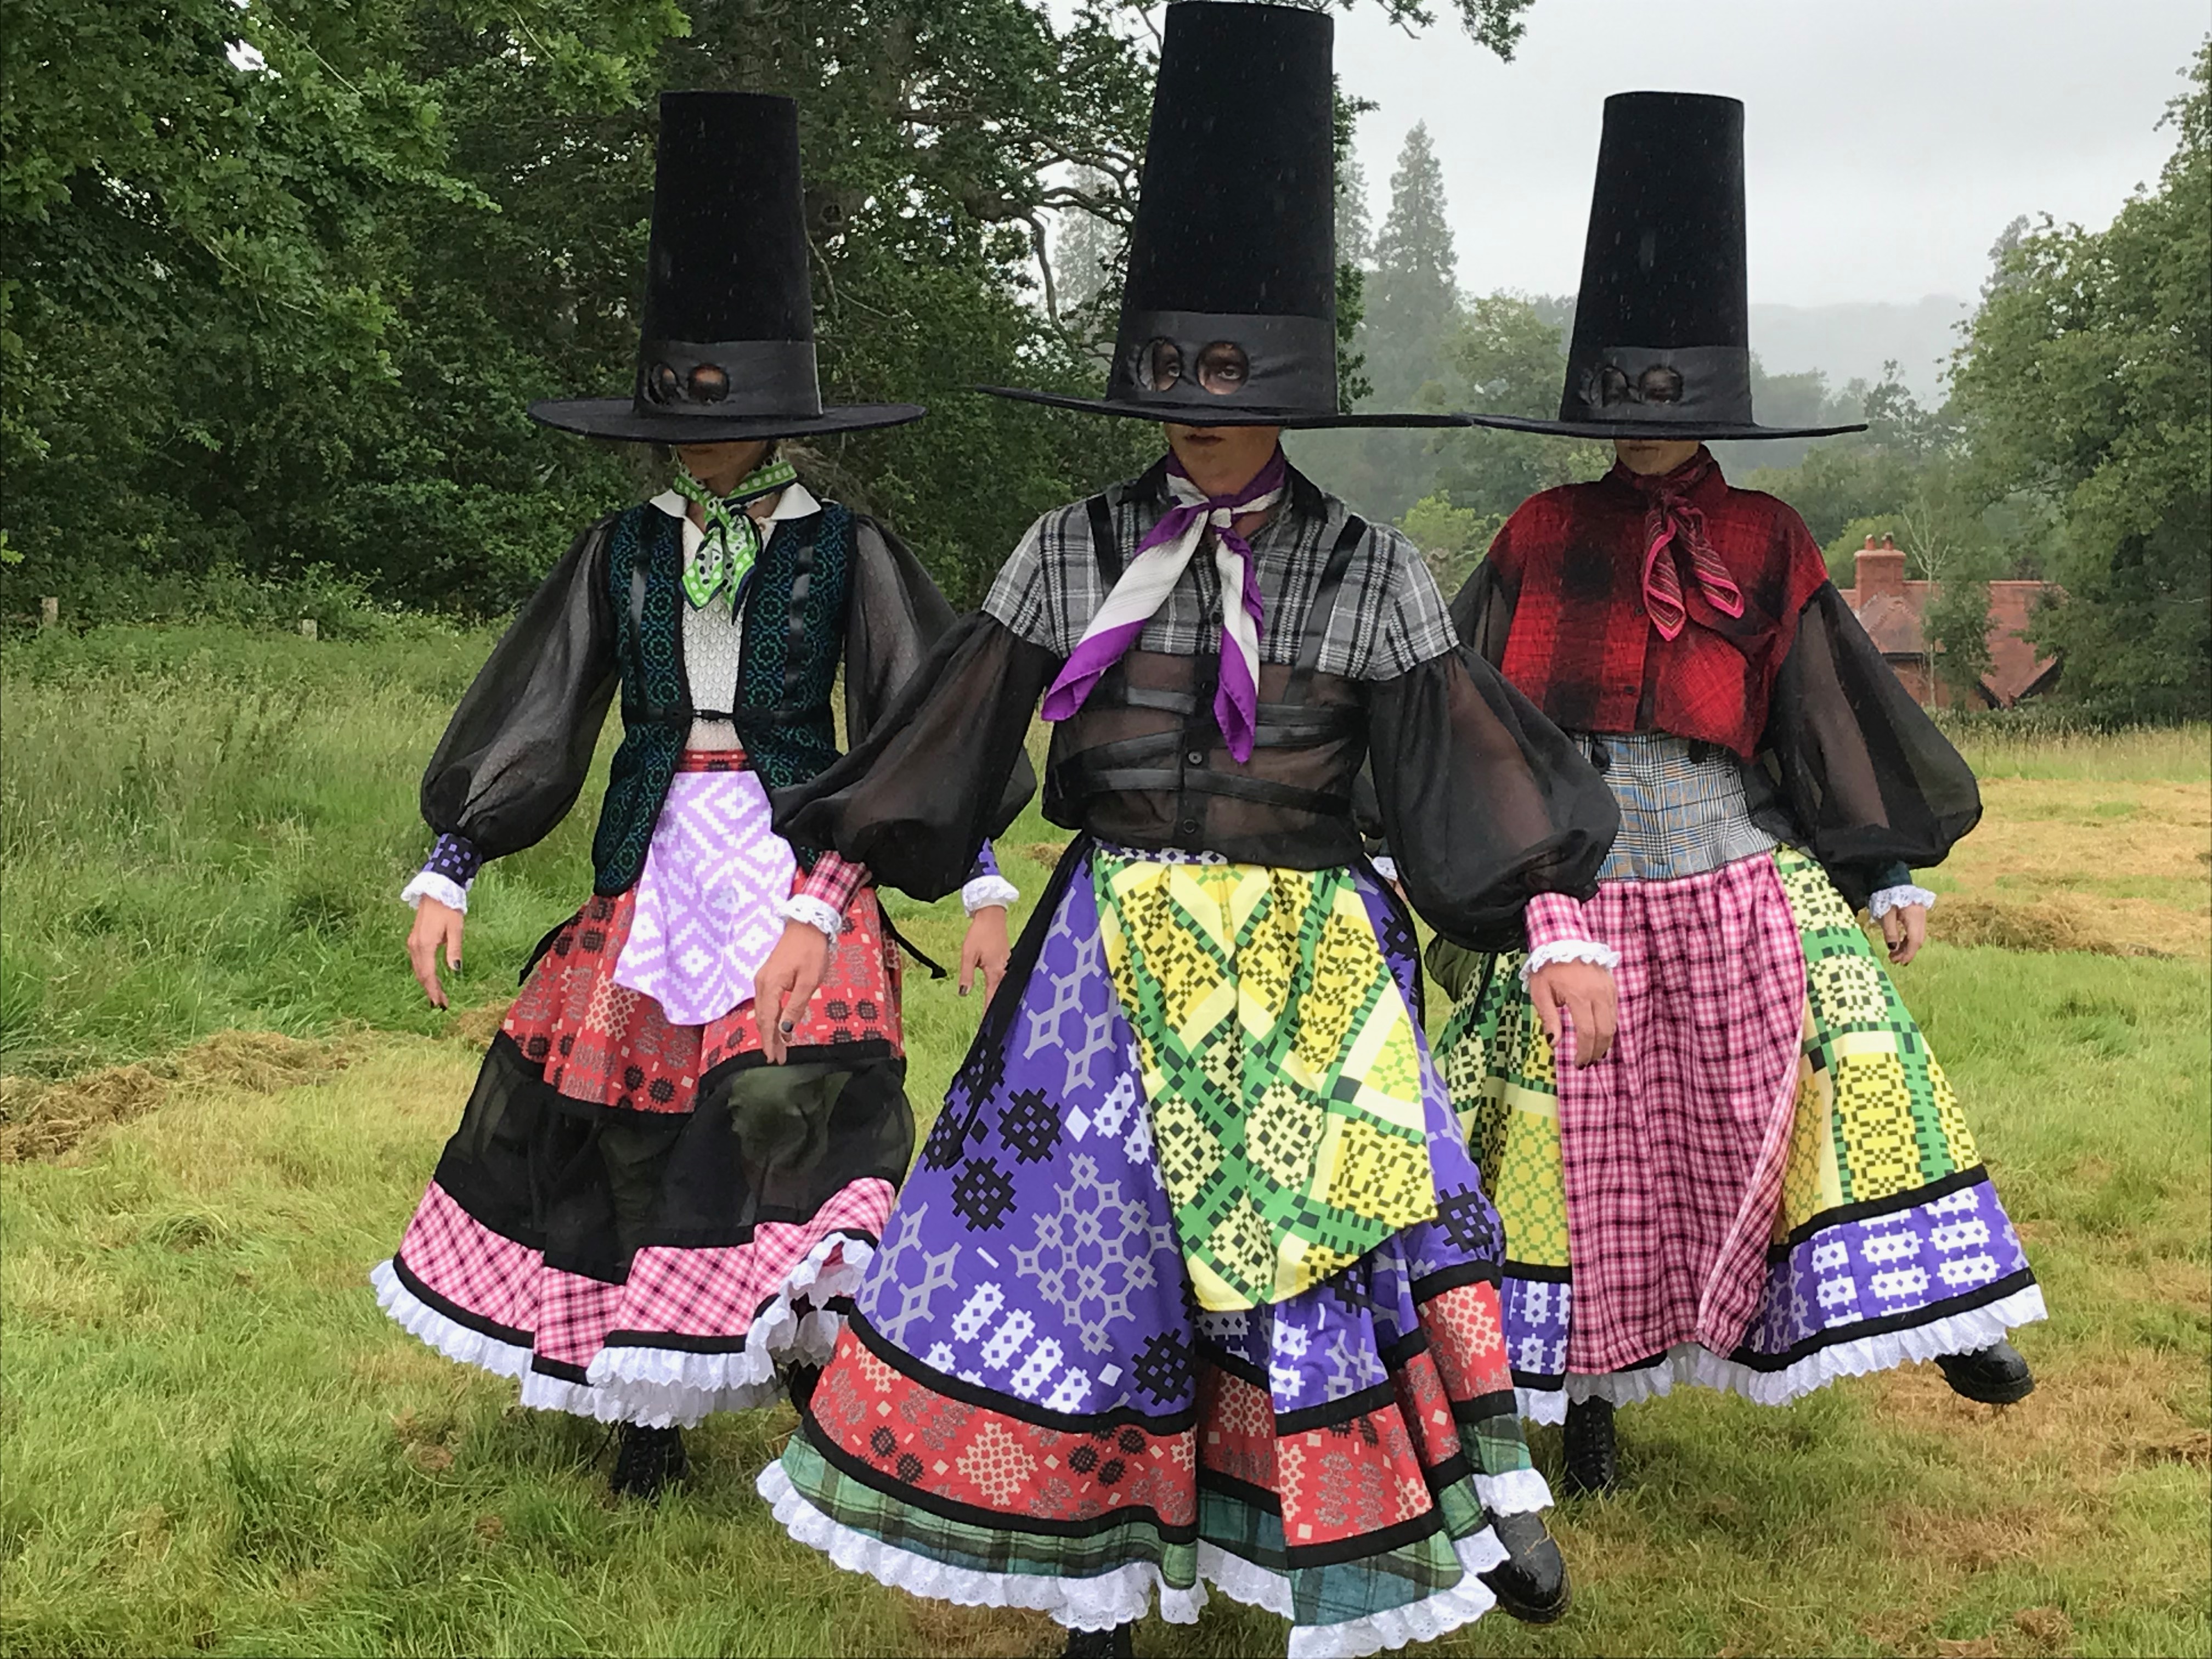 Three people in traditional Welsh costumes with tall hats